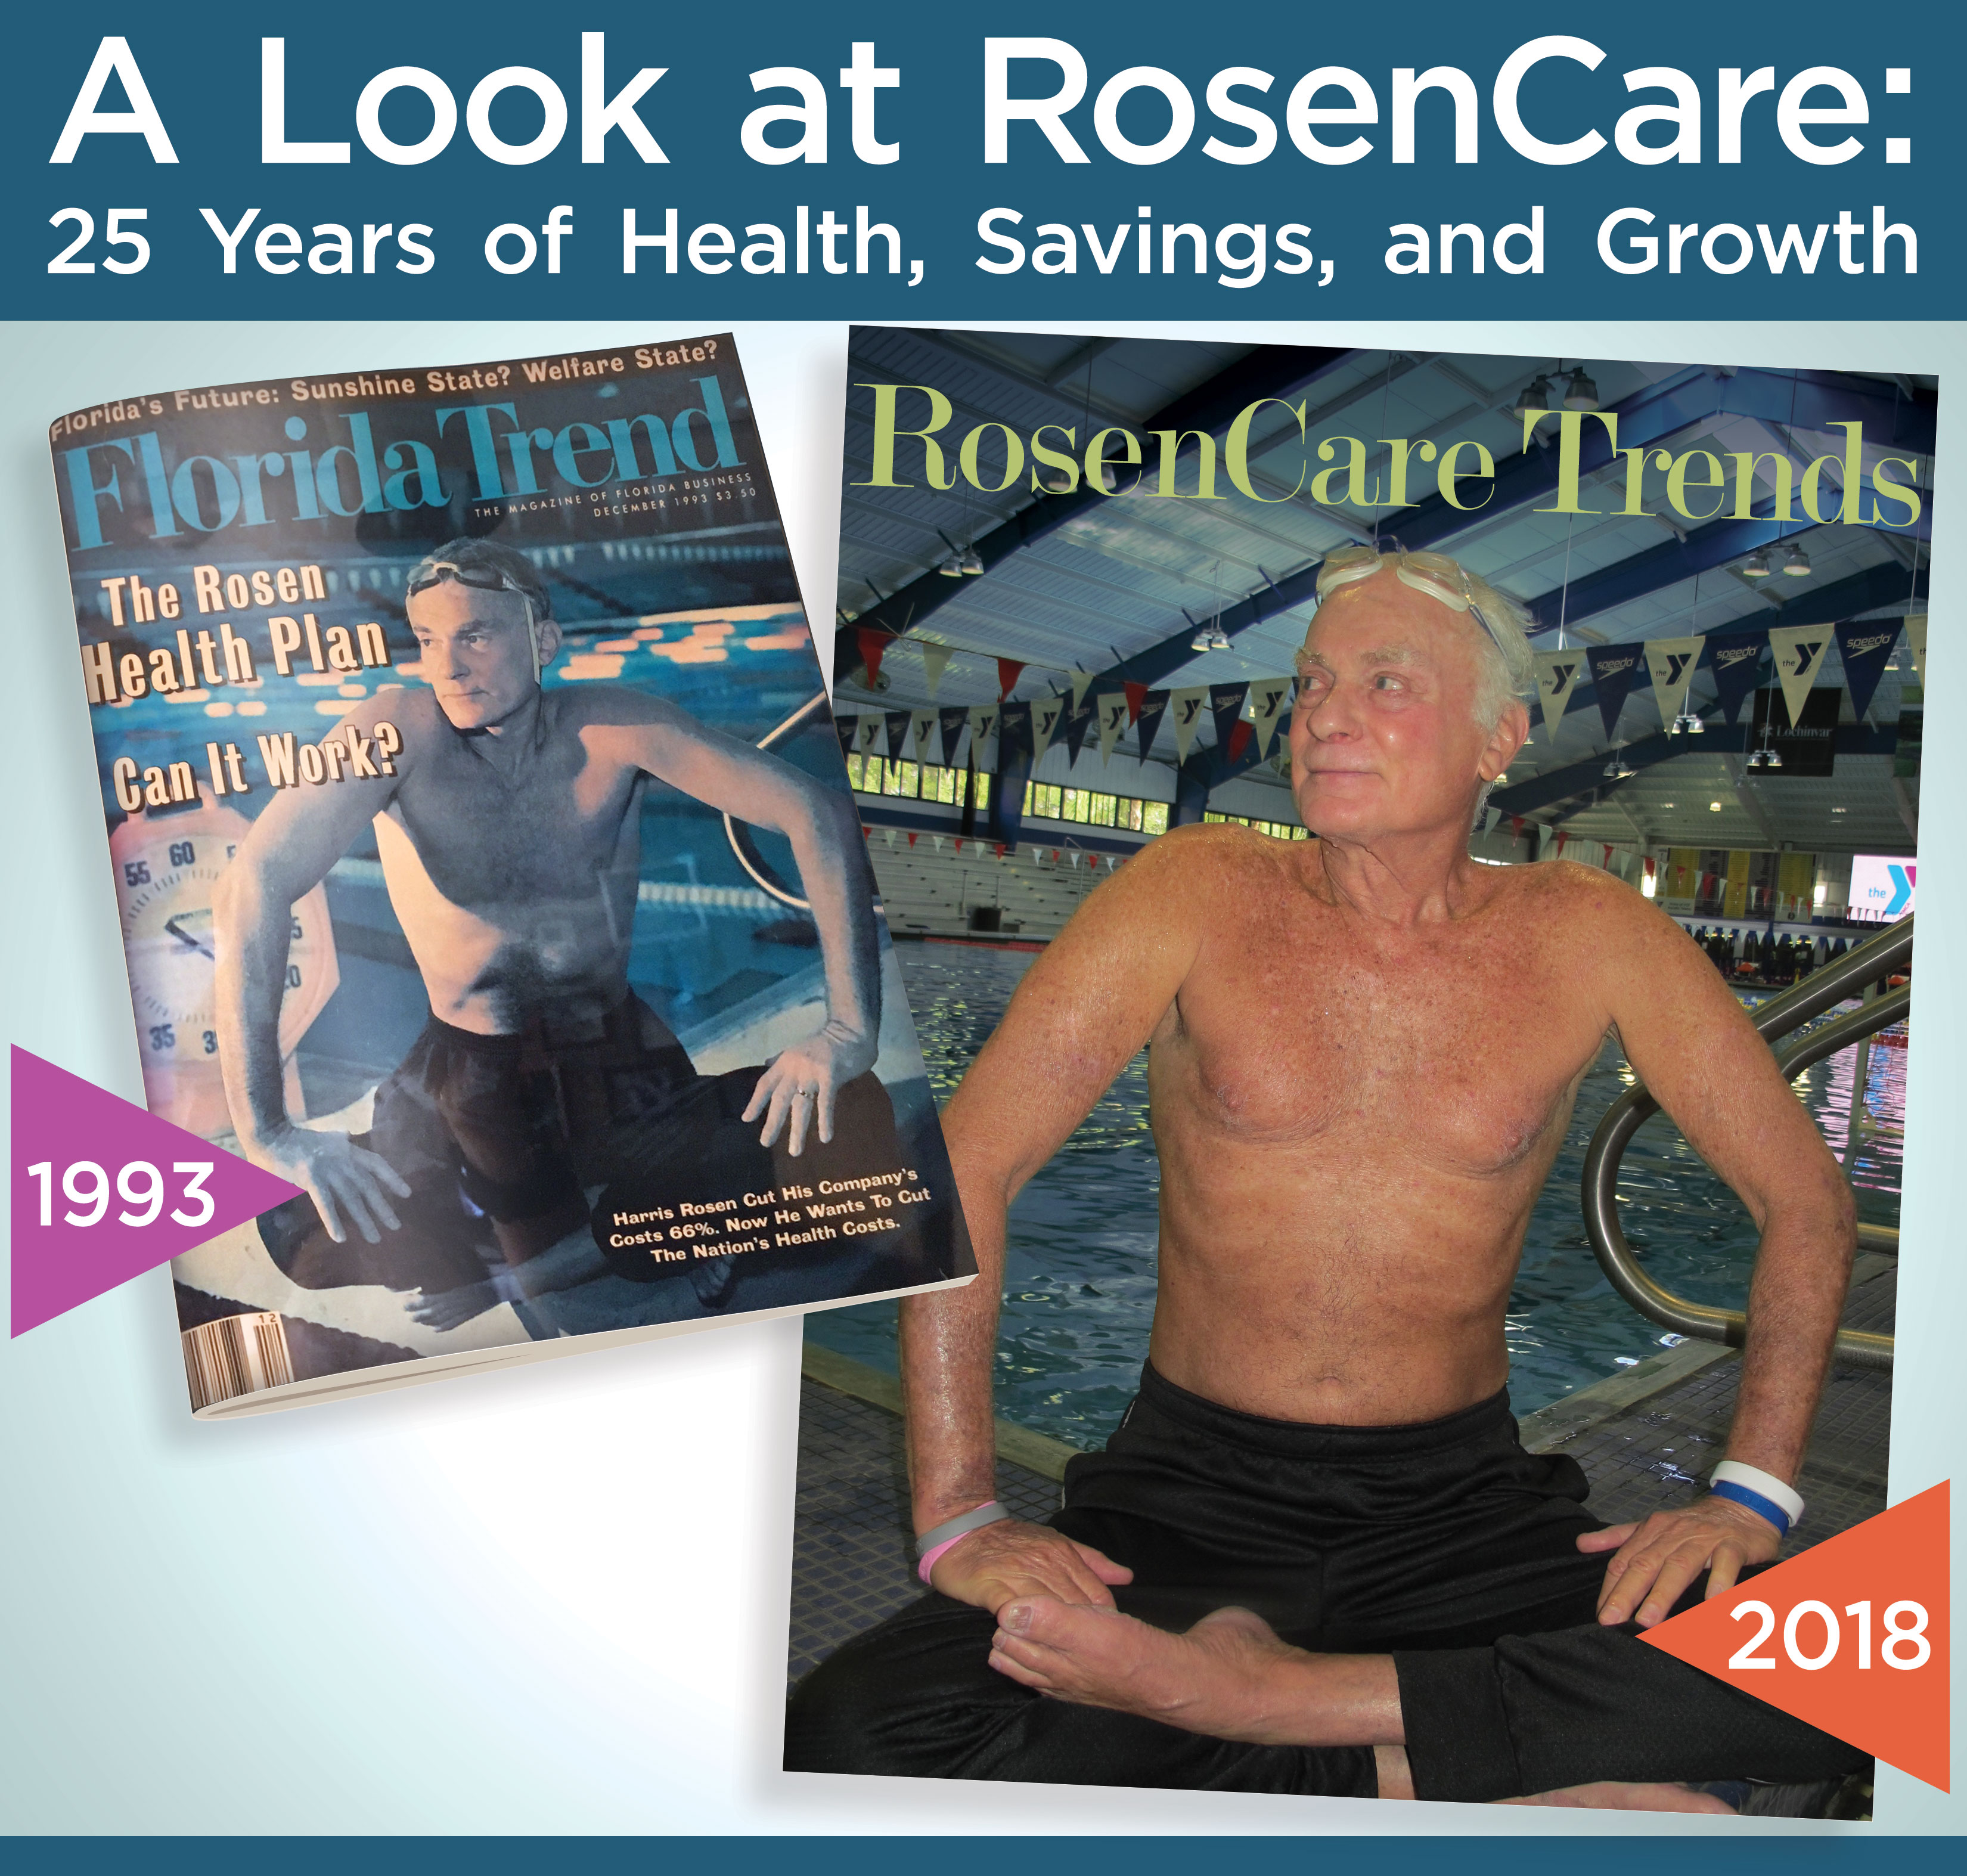 A Look at Rosen Care 25 Years Later Magazine Covers